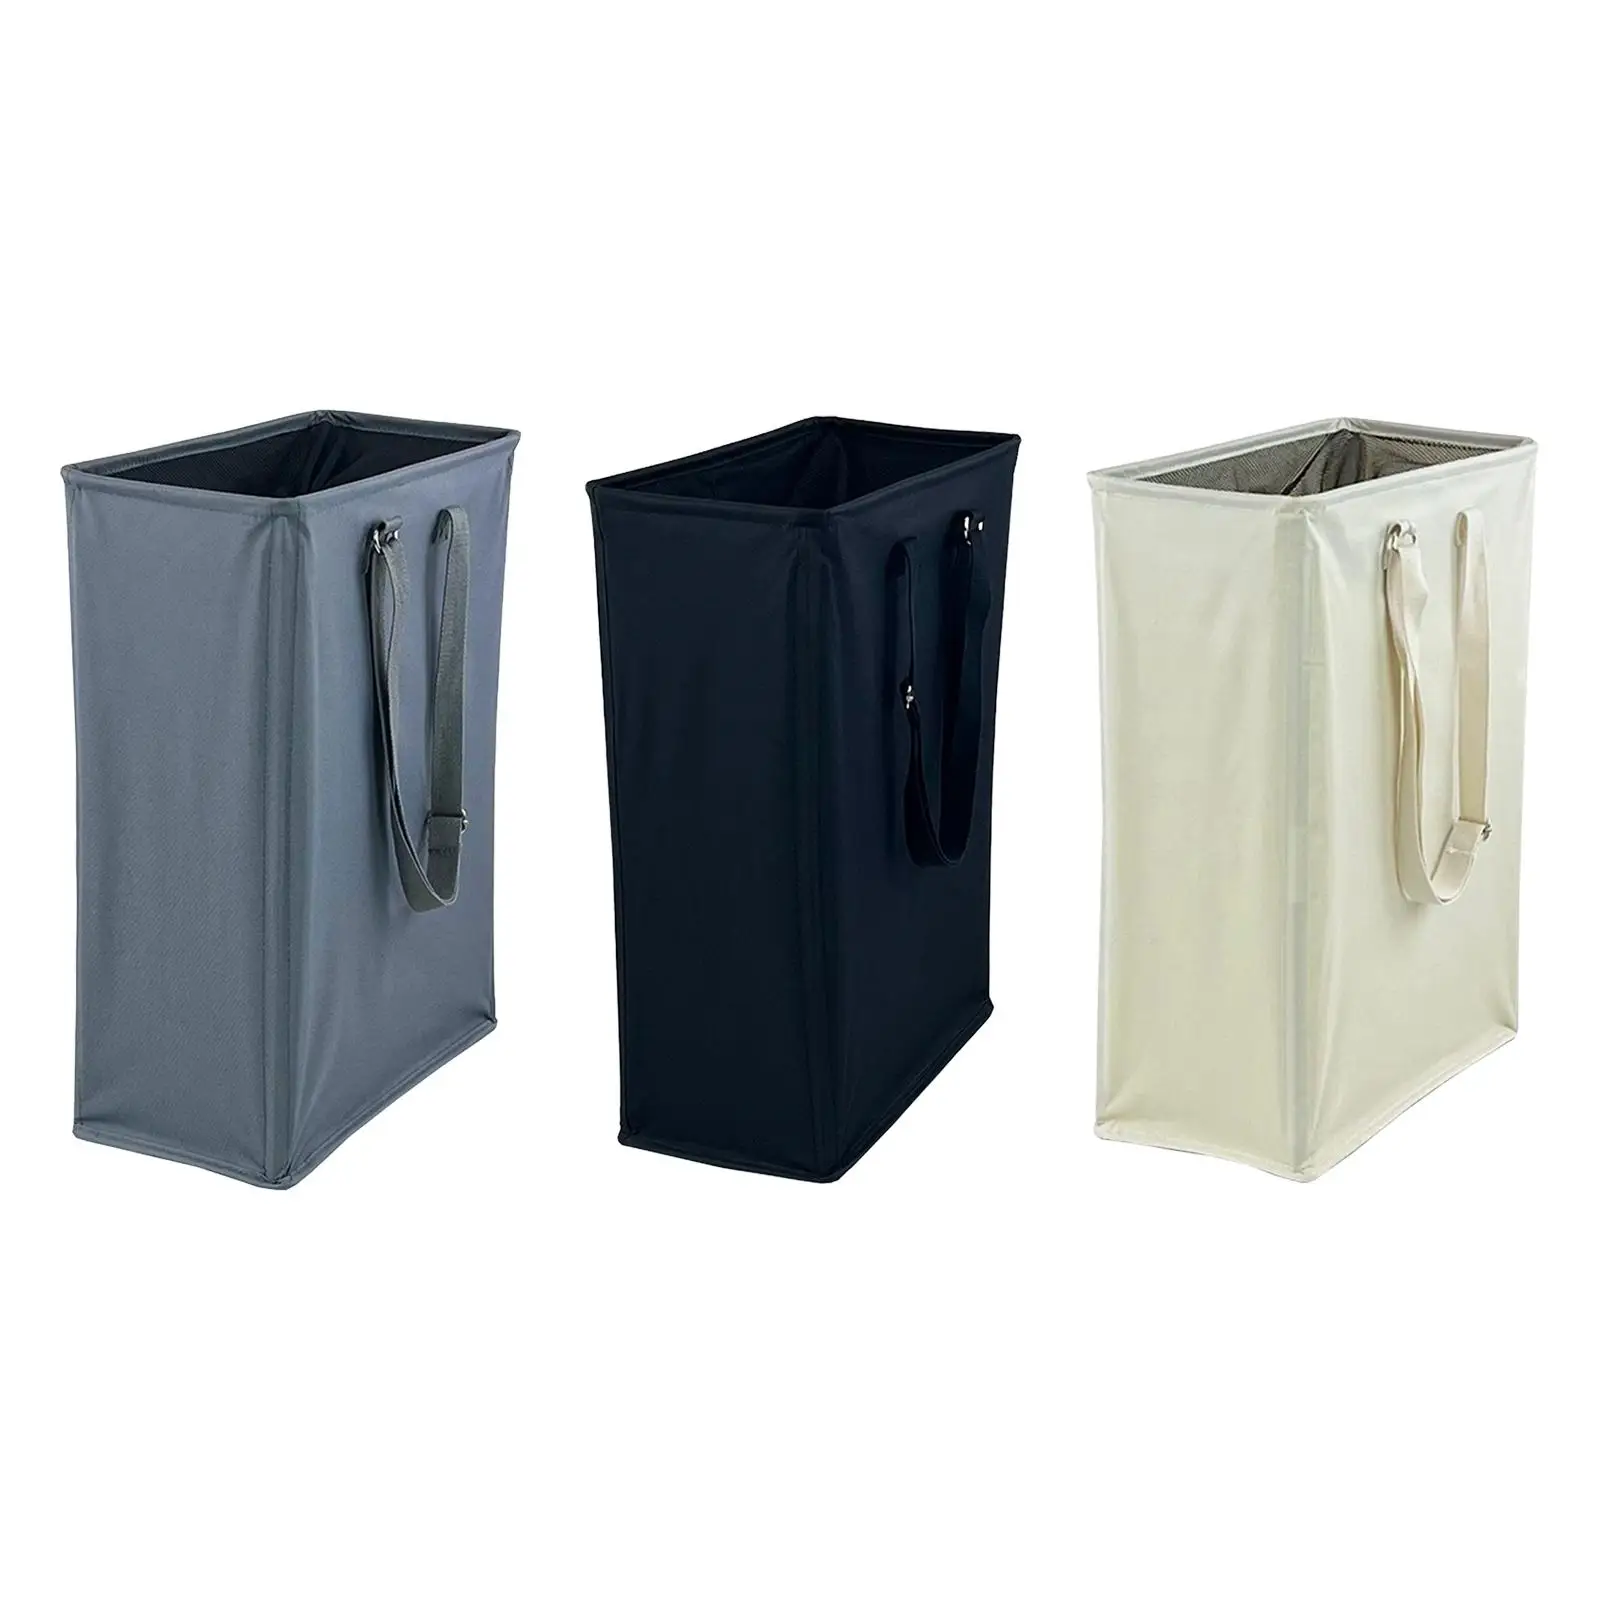 Collapsible Laundry Baskets with Handle Laundry Hamper for Home Dorm Blanket